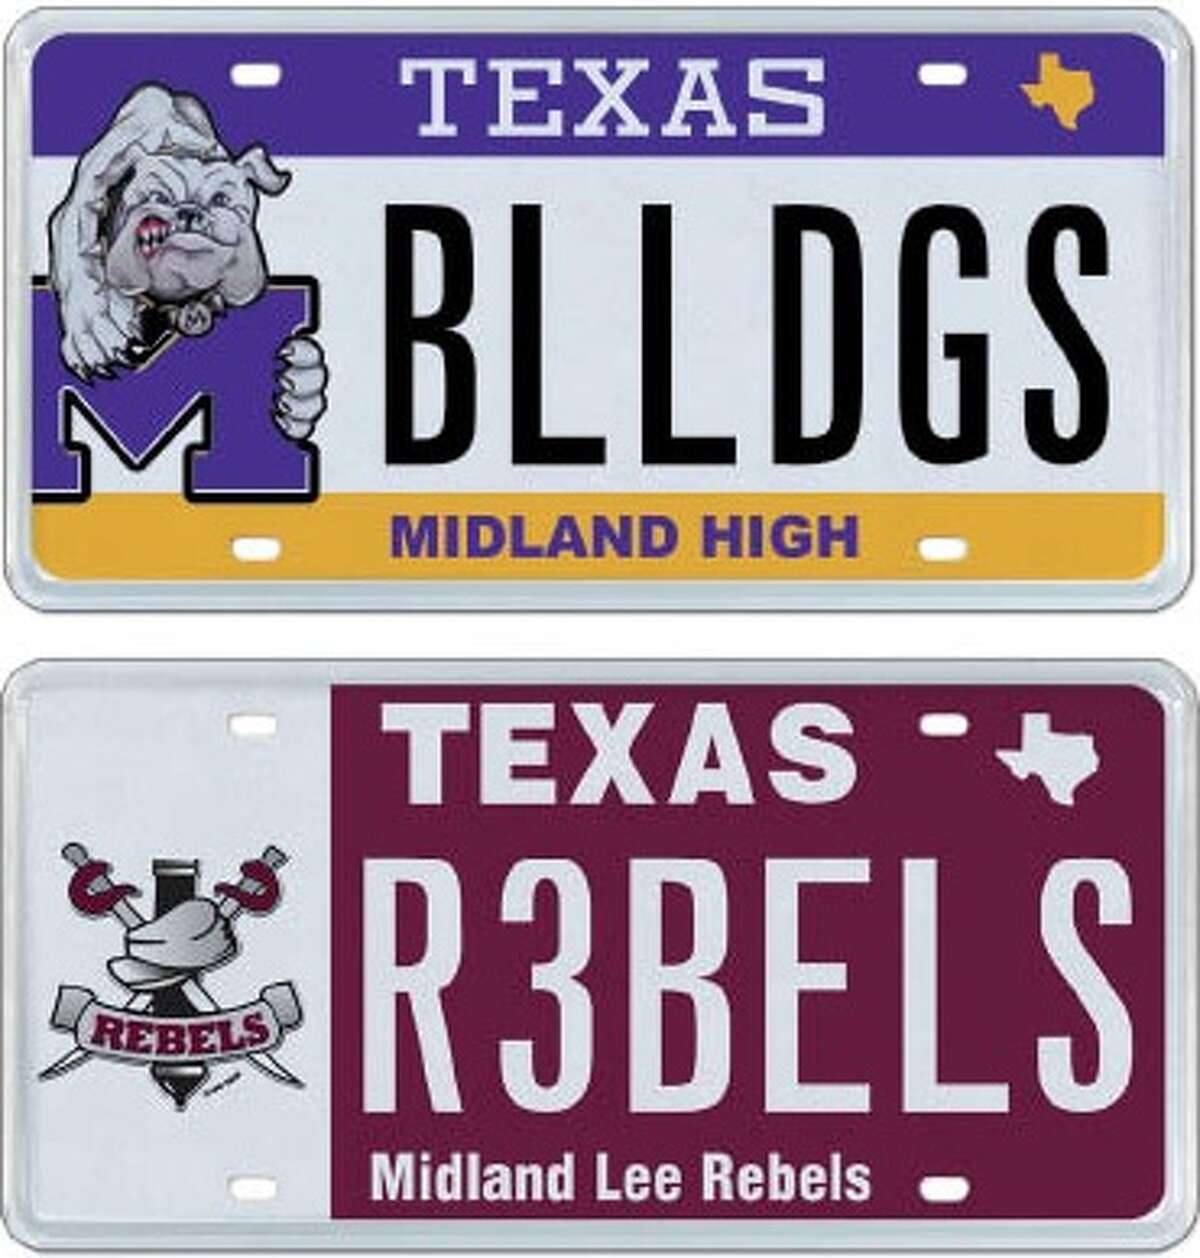 The New Support Education Specialty Plate is Available Now